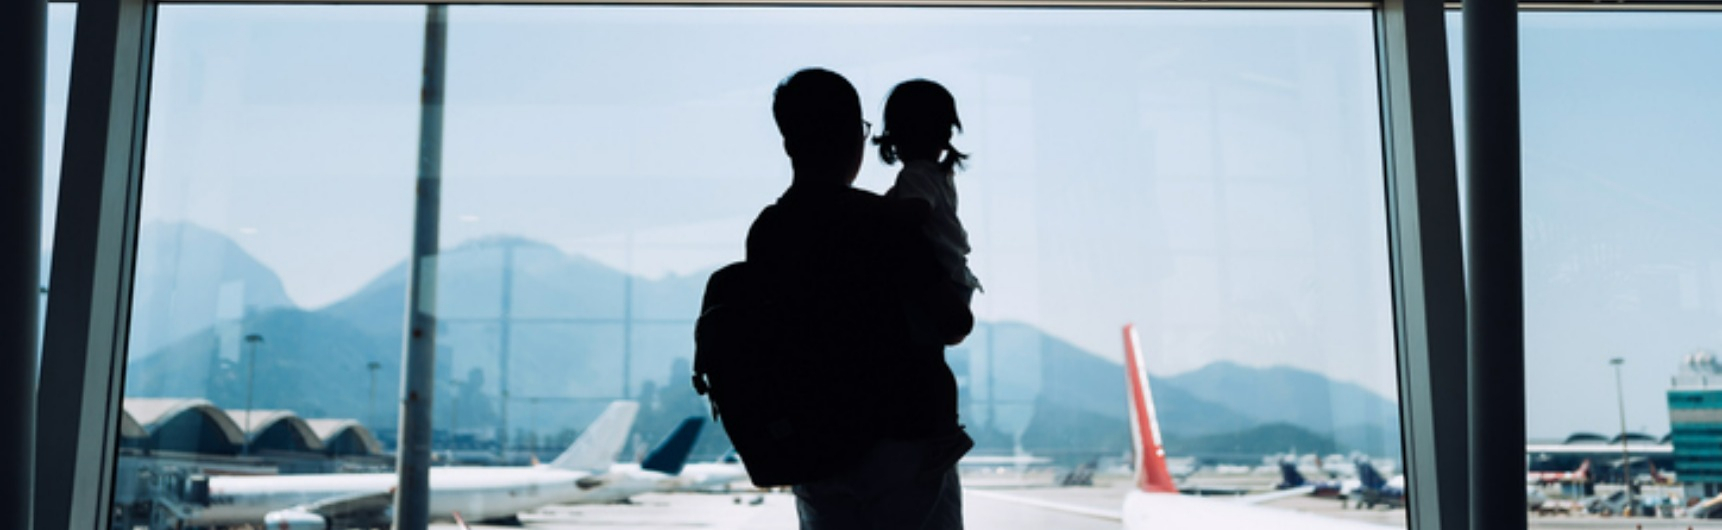 A man and child look at planes in the airport